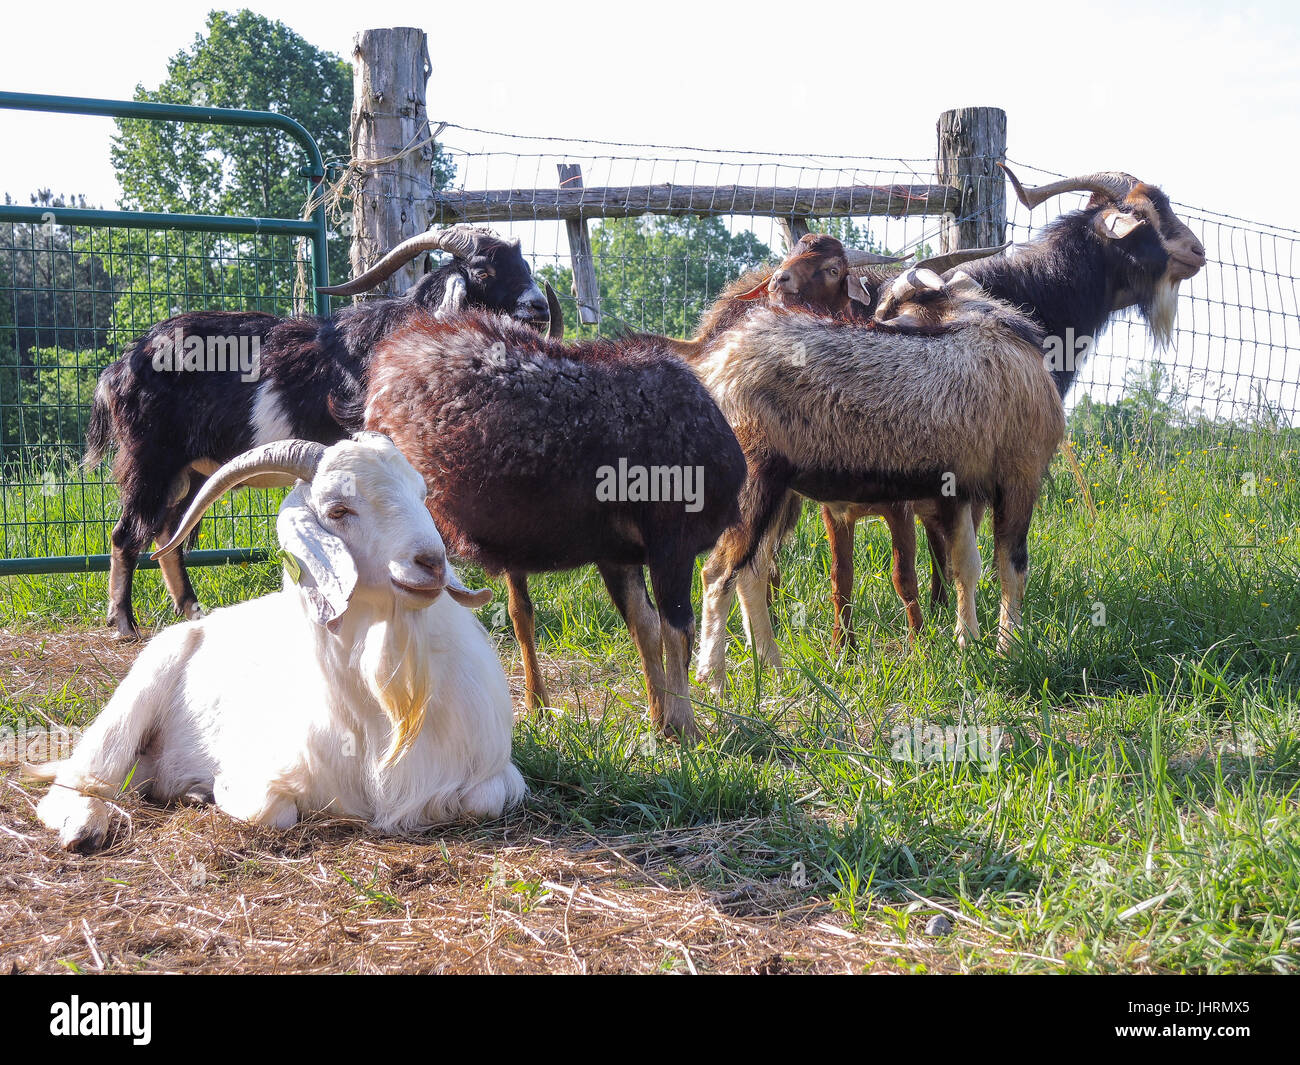 White goat reclining, brown goats in background, fenced in field Stock Photo